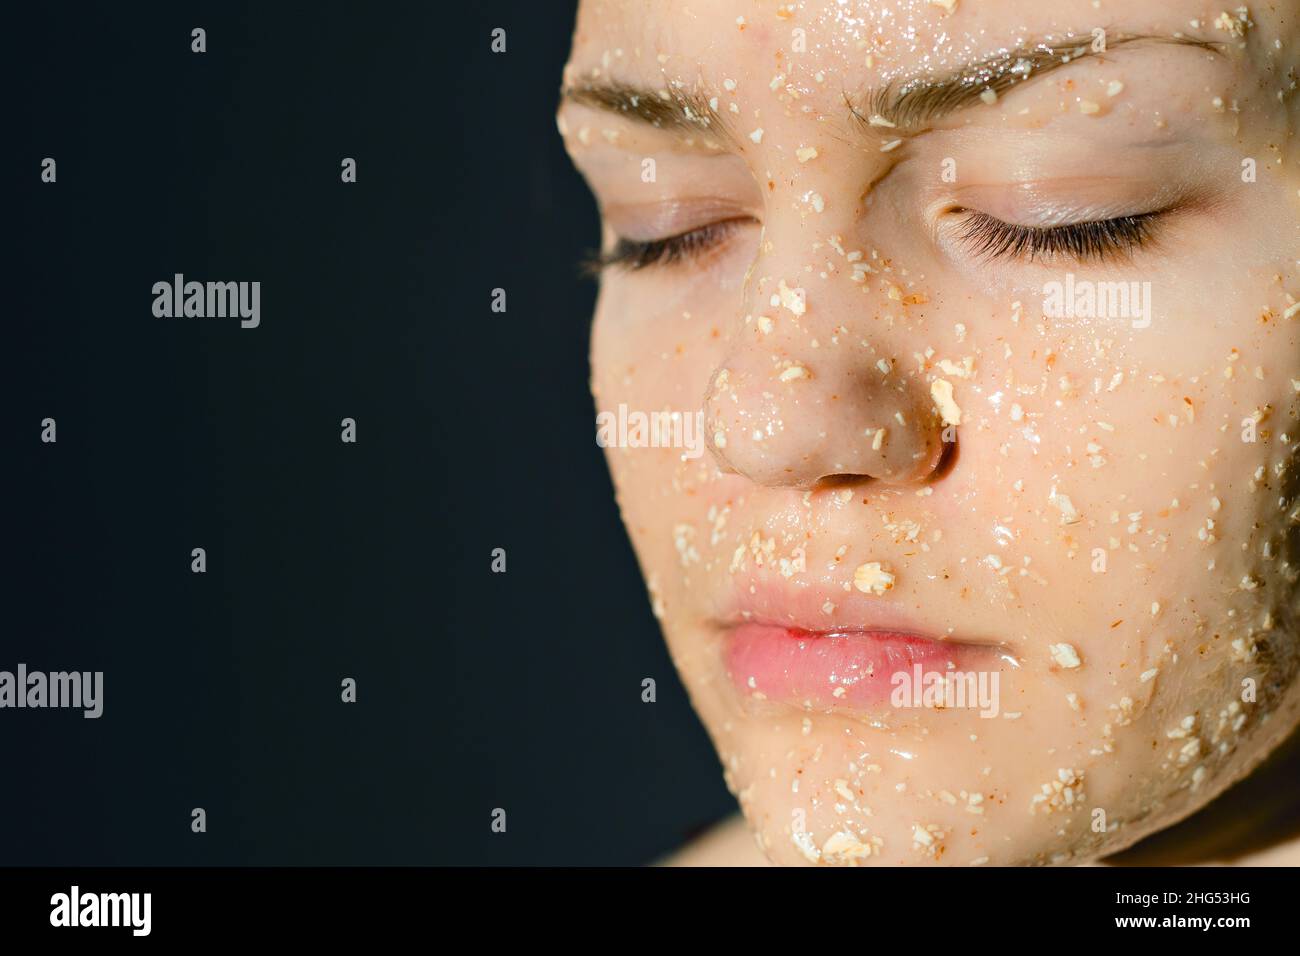 Face of girl with cosmetic mask of oatmeal with honey. Prevention of acne in adolescents. Woman's face with her eyes closed on dark background. Stock Photo